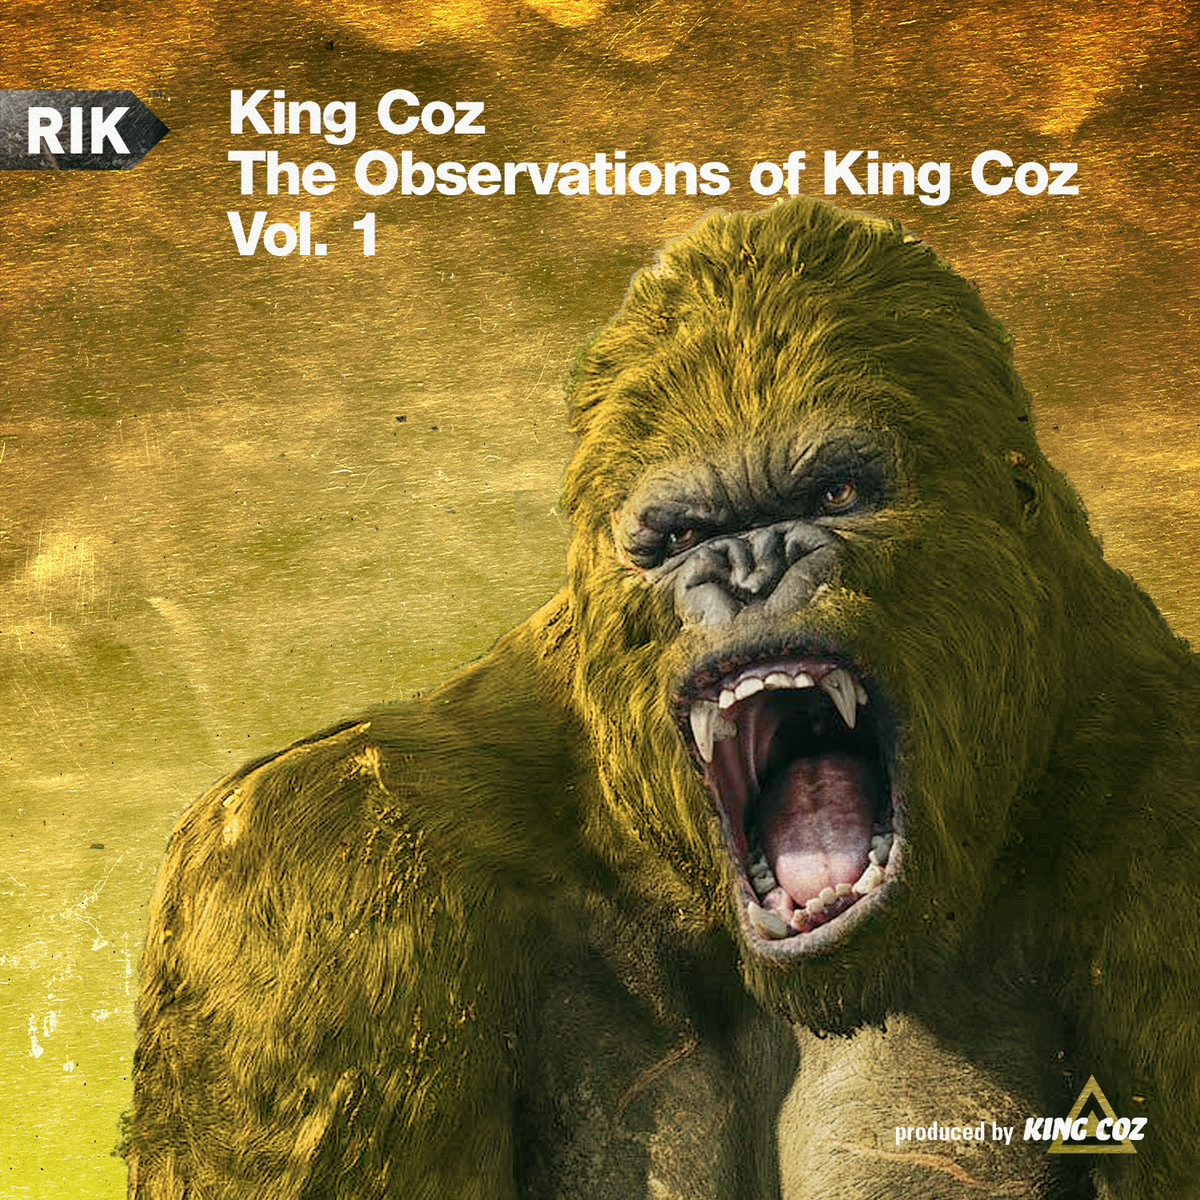 King Coz “The Observations of King Coz Vol. I”